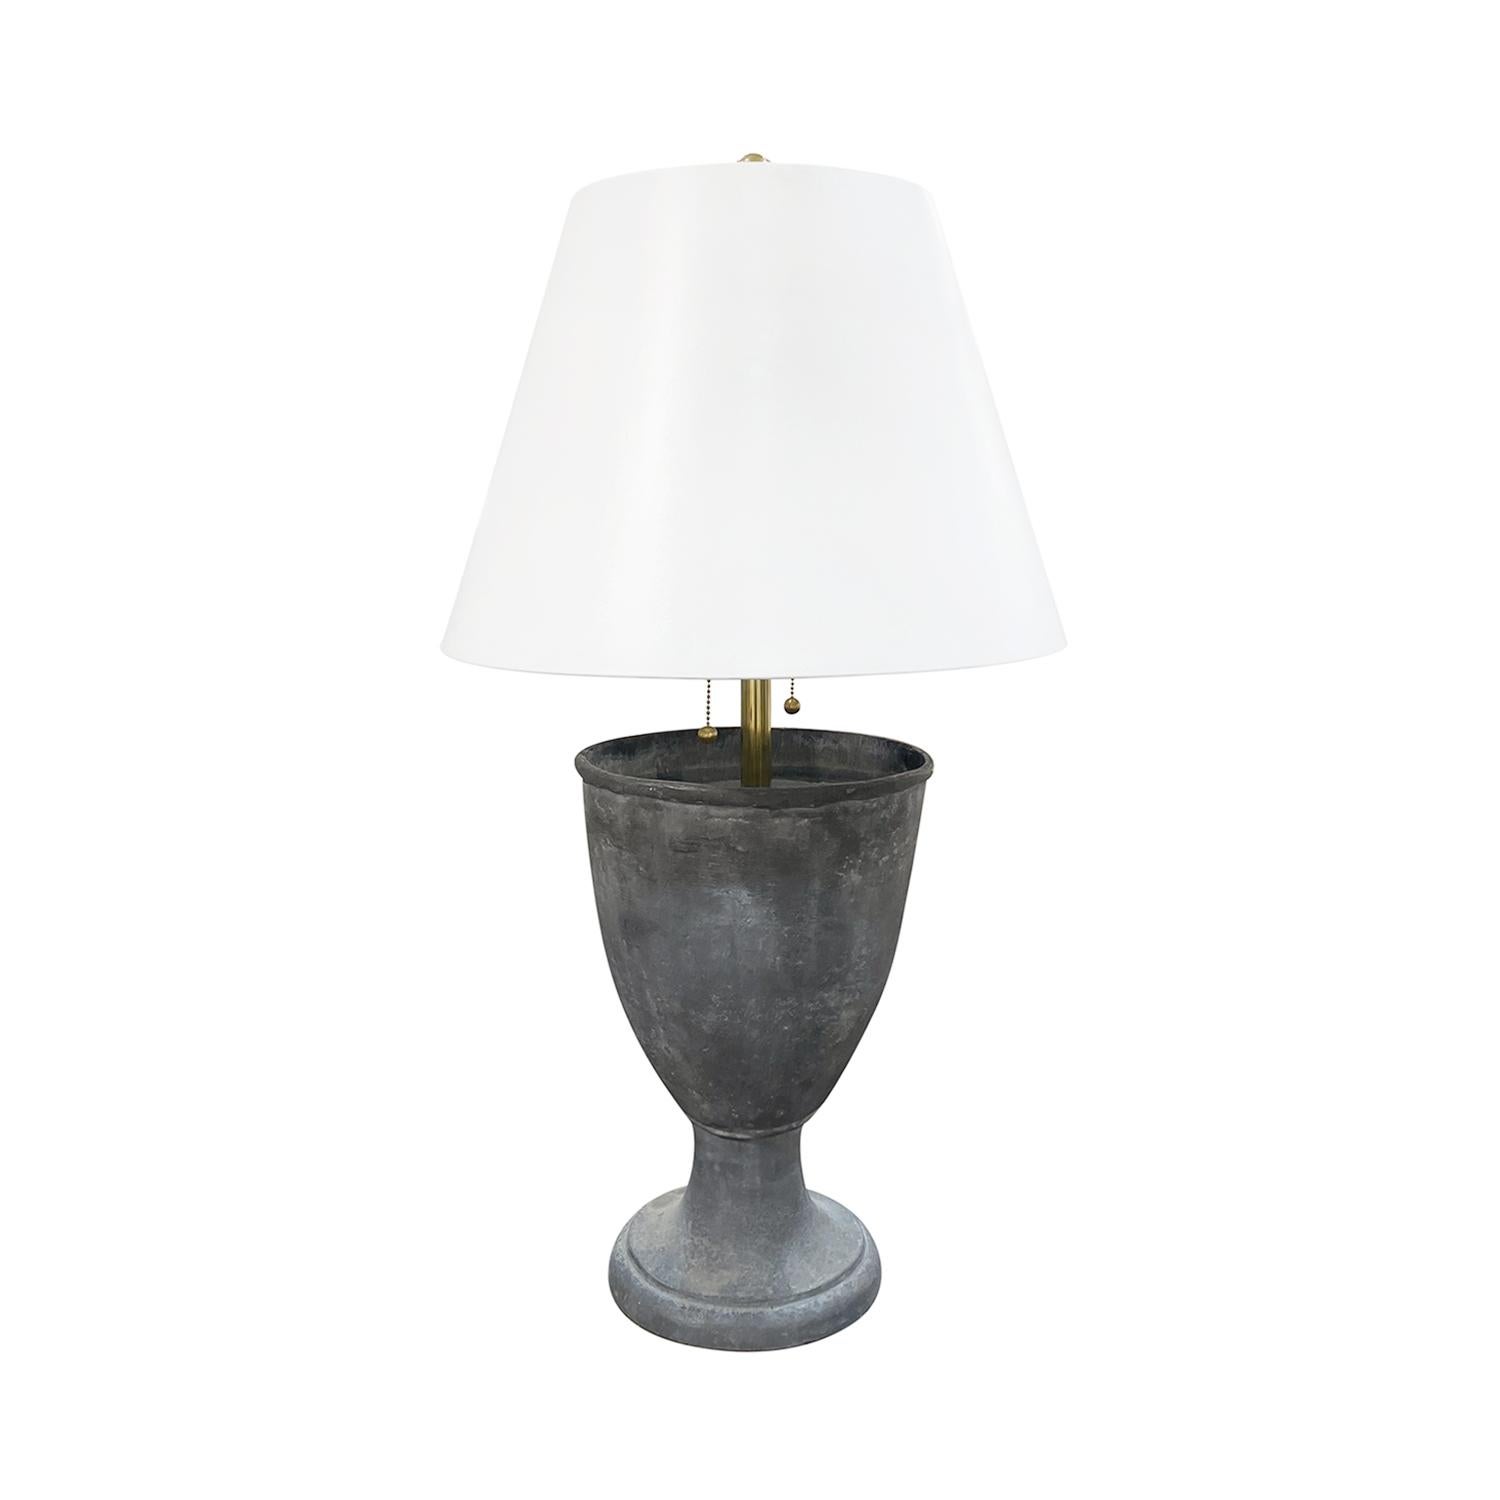 A vintage Industrial Style French pair of large table lamps made of hand crafted metal, in good condition. The vase shaped lights are composed with a new white round shade, enhanced by a polished brass beam, finial featuring a two light socket. The